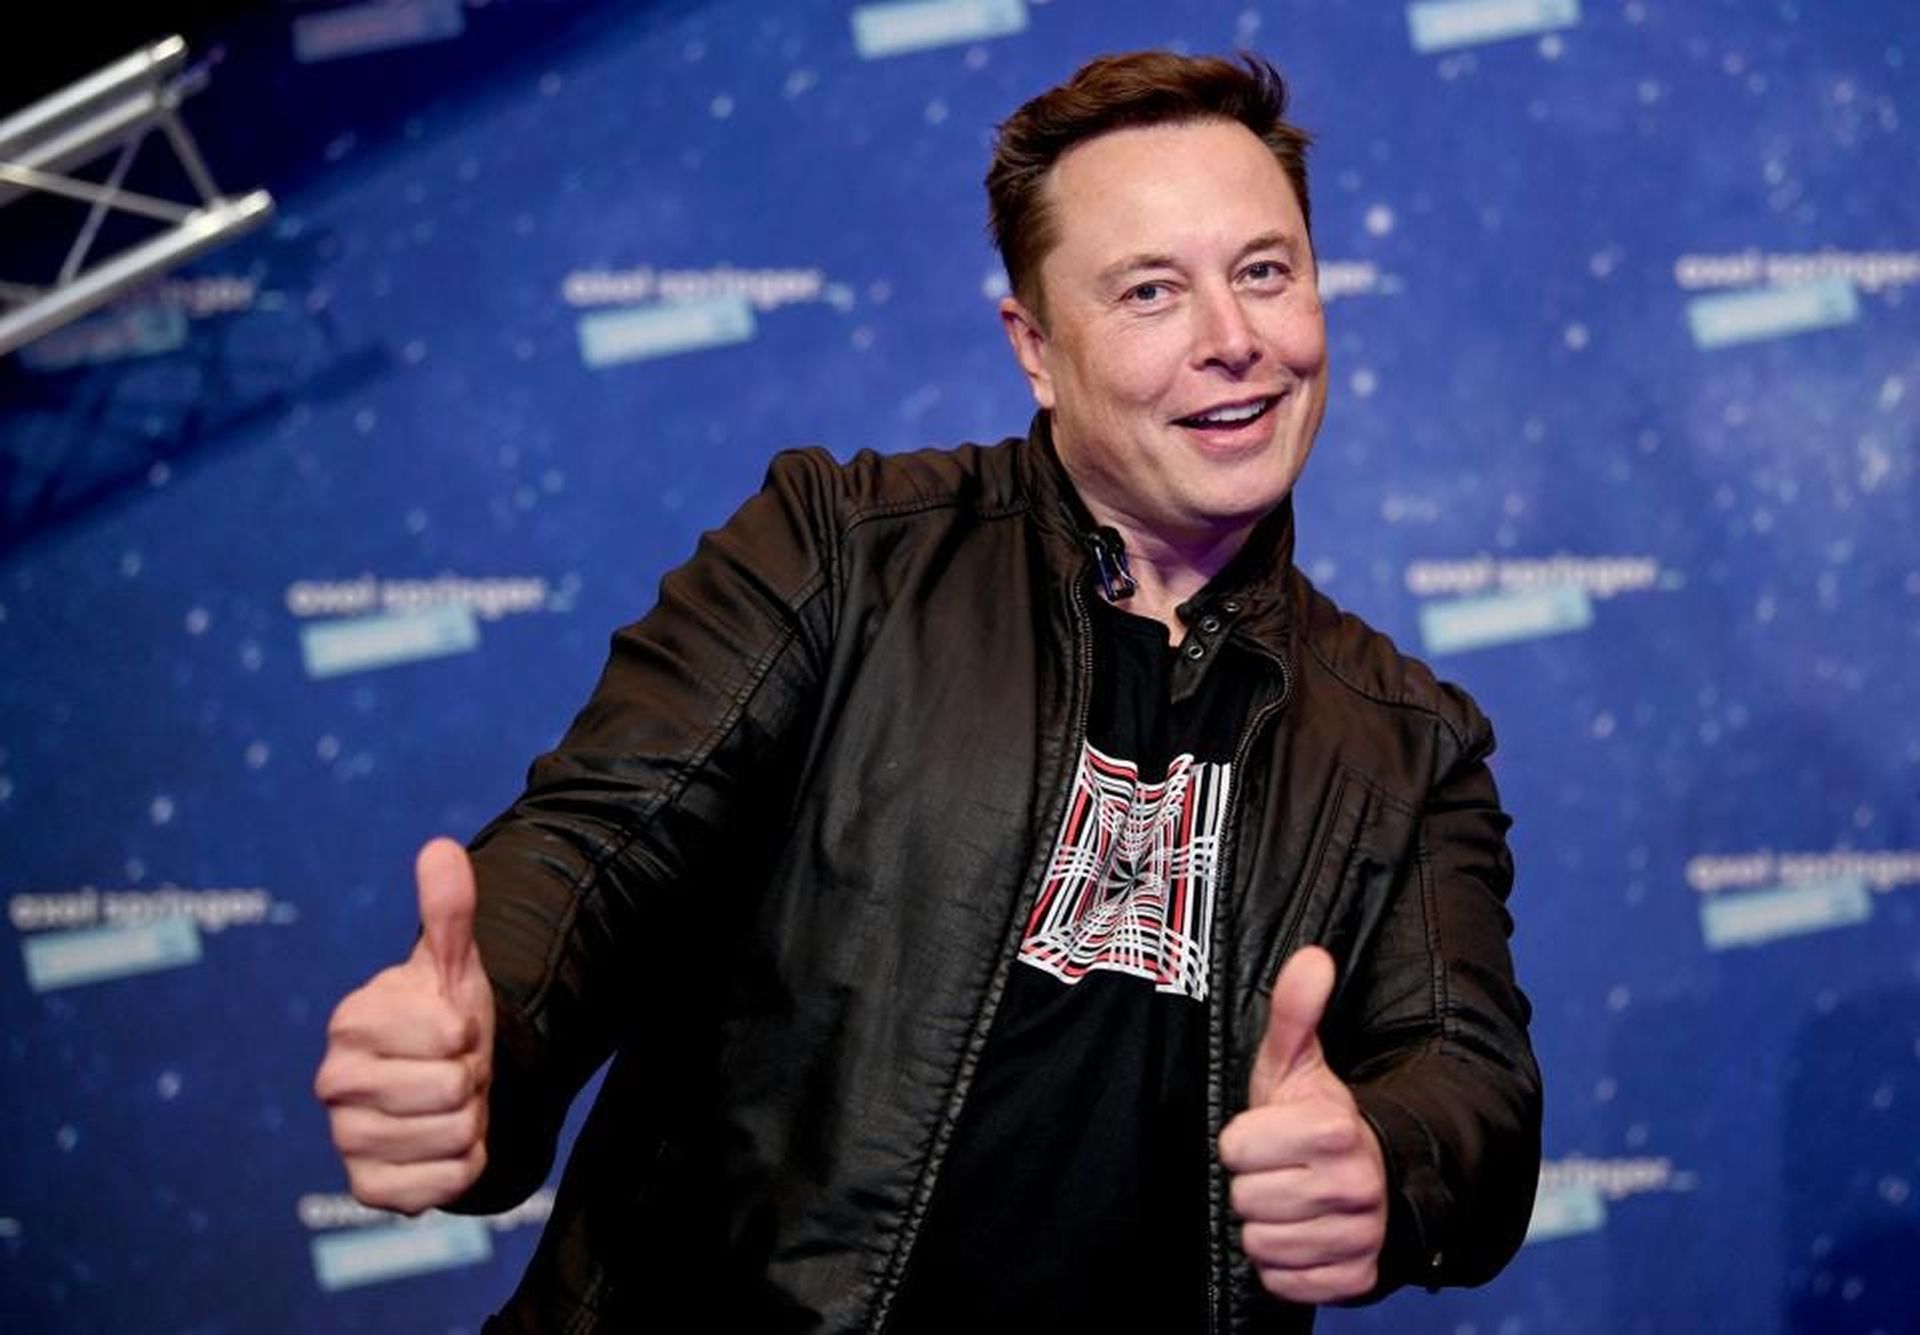 Elon Musk says Twitter interfered in elections and that "Twitter 2.0 will be far more effective, transparent and even-handed," while replying on a thread...